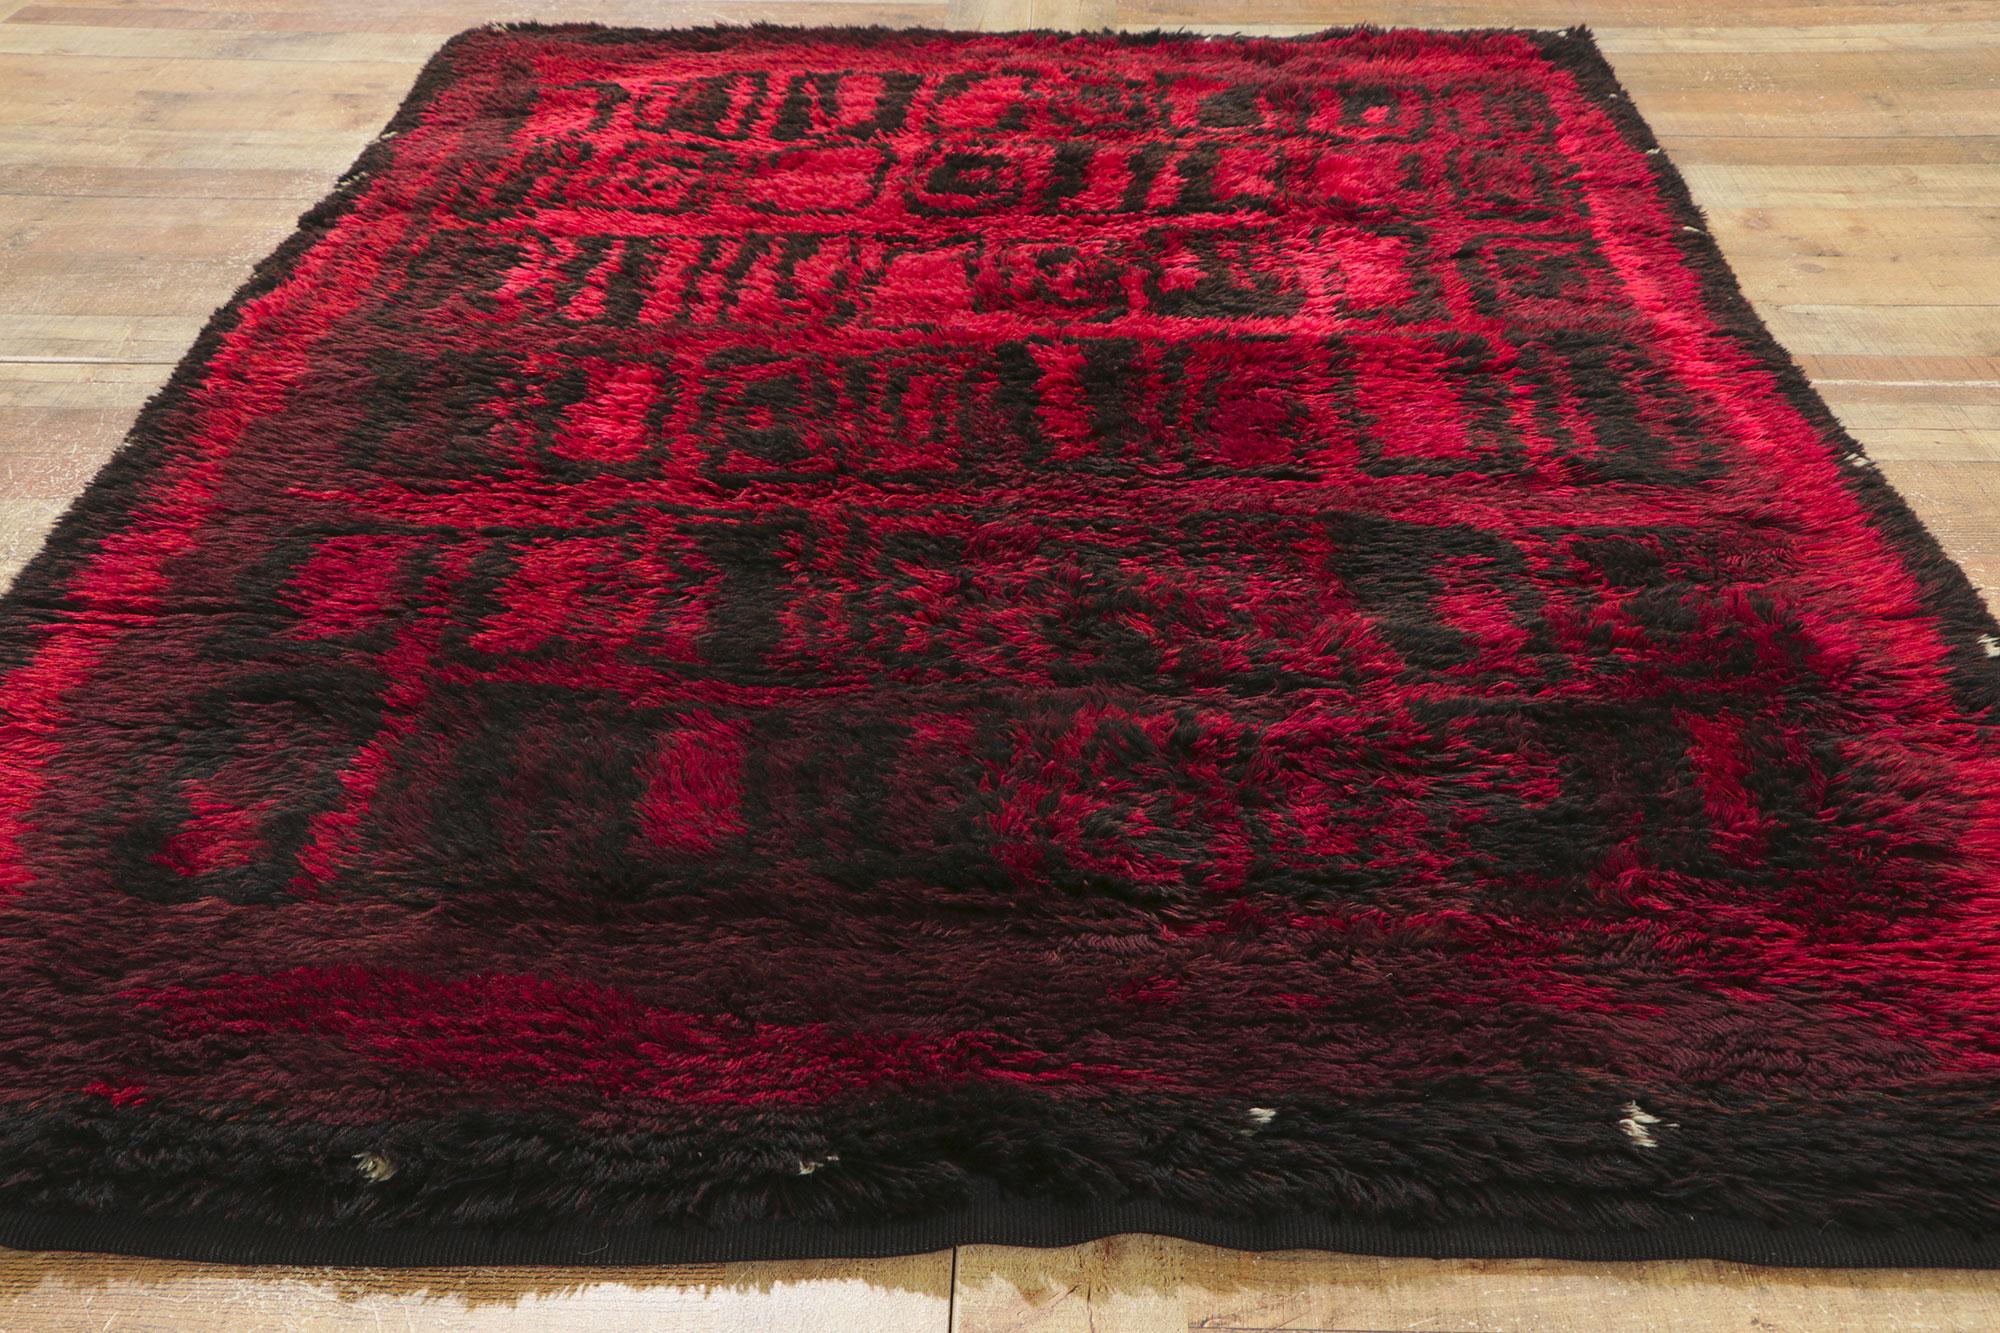 Wool Signed 1963 Kirsti Ilvessalo Finnish Ryijy Carpet, Punainen Syksy Red Autumn For Sale